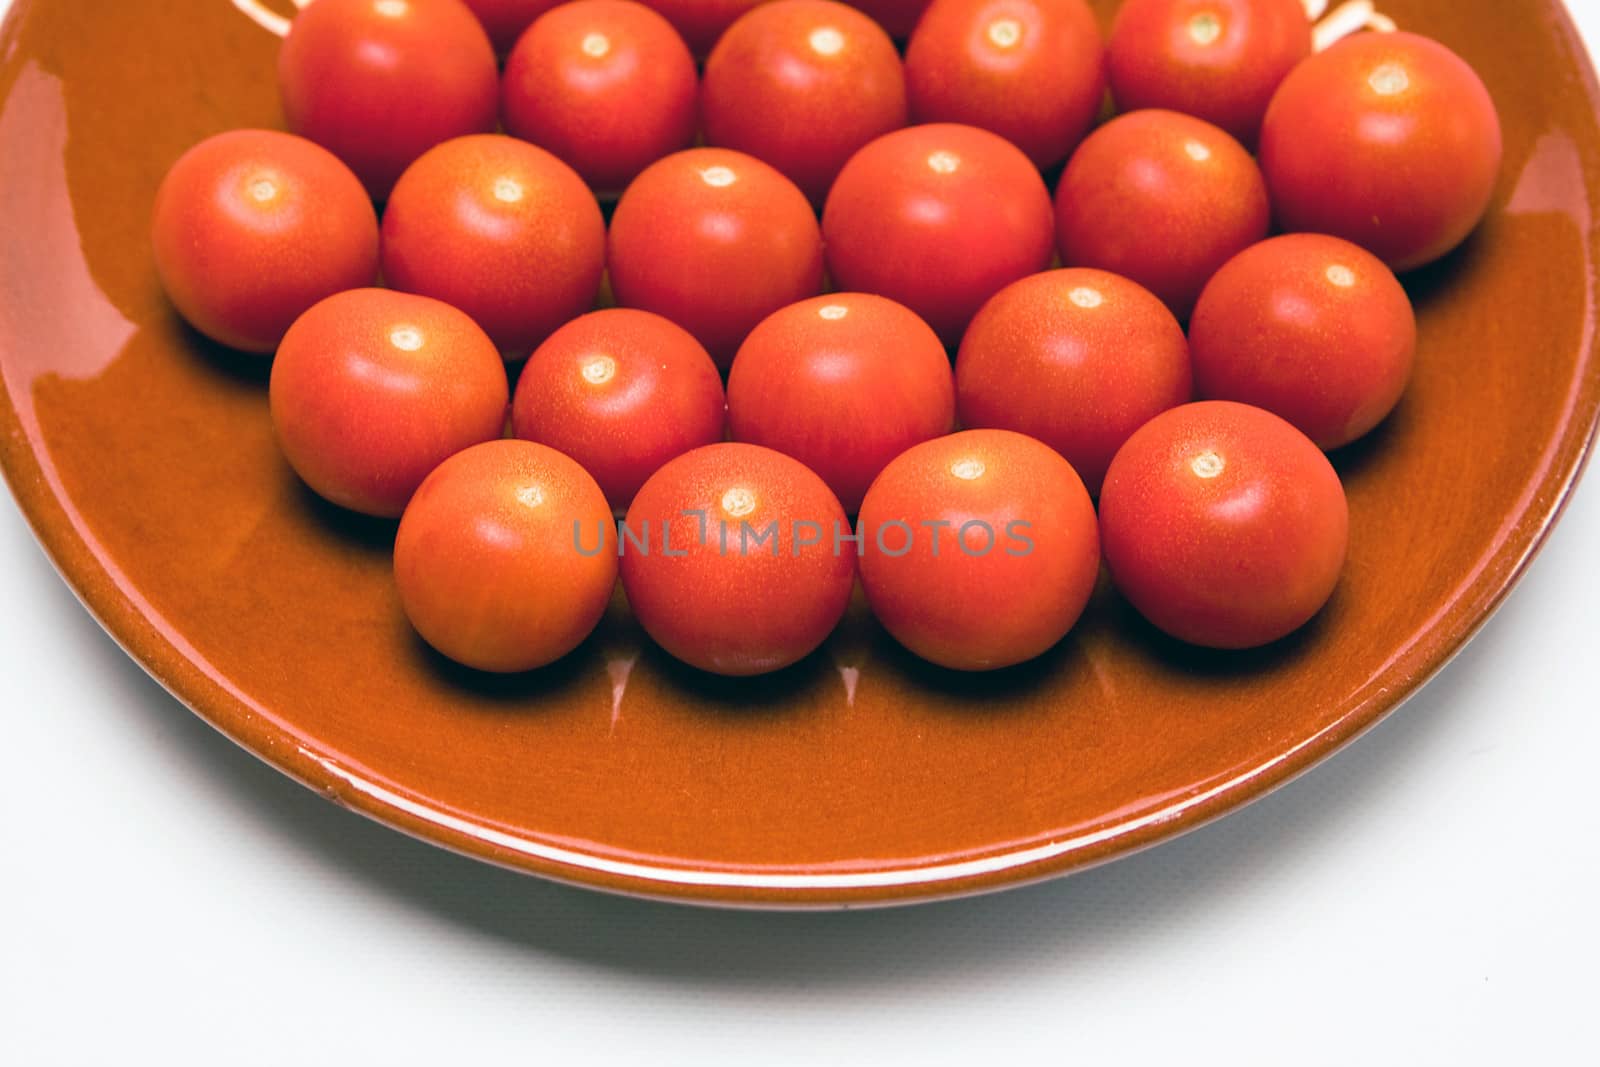 Cherry tomatoes on a ceramic bowl